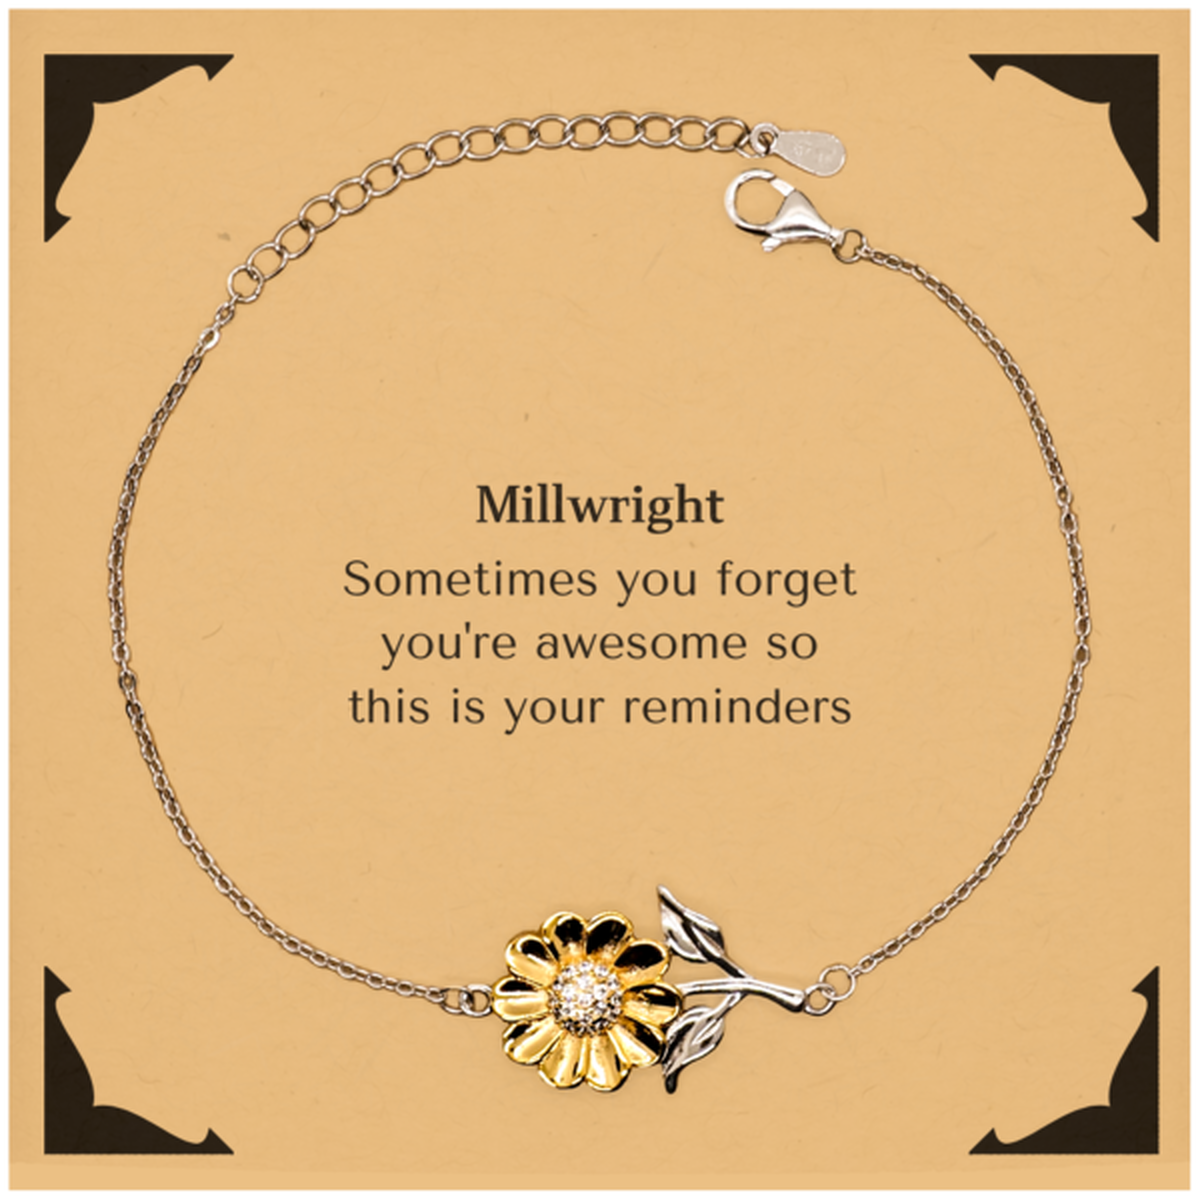 Sentimental Millwright Sunflower Bracelet, Millwright Sometimes you forget you're awesome so this is your reminders, Graduation Christmas Birthday Gifts for Millwright, Men, Women, Coworkers